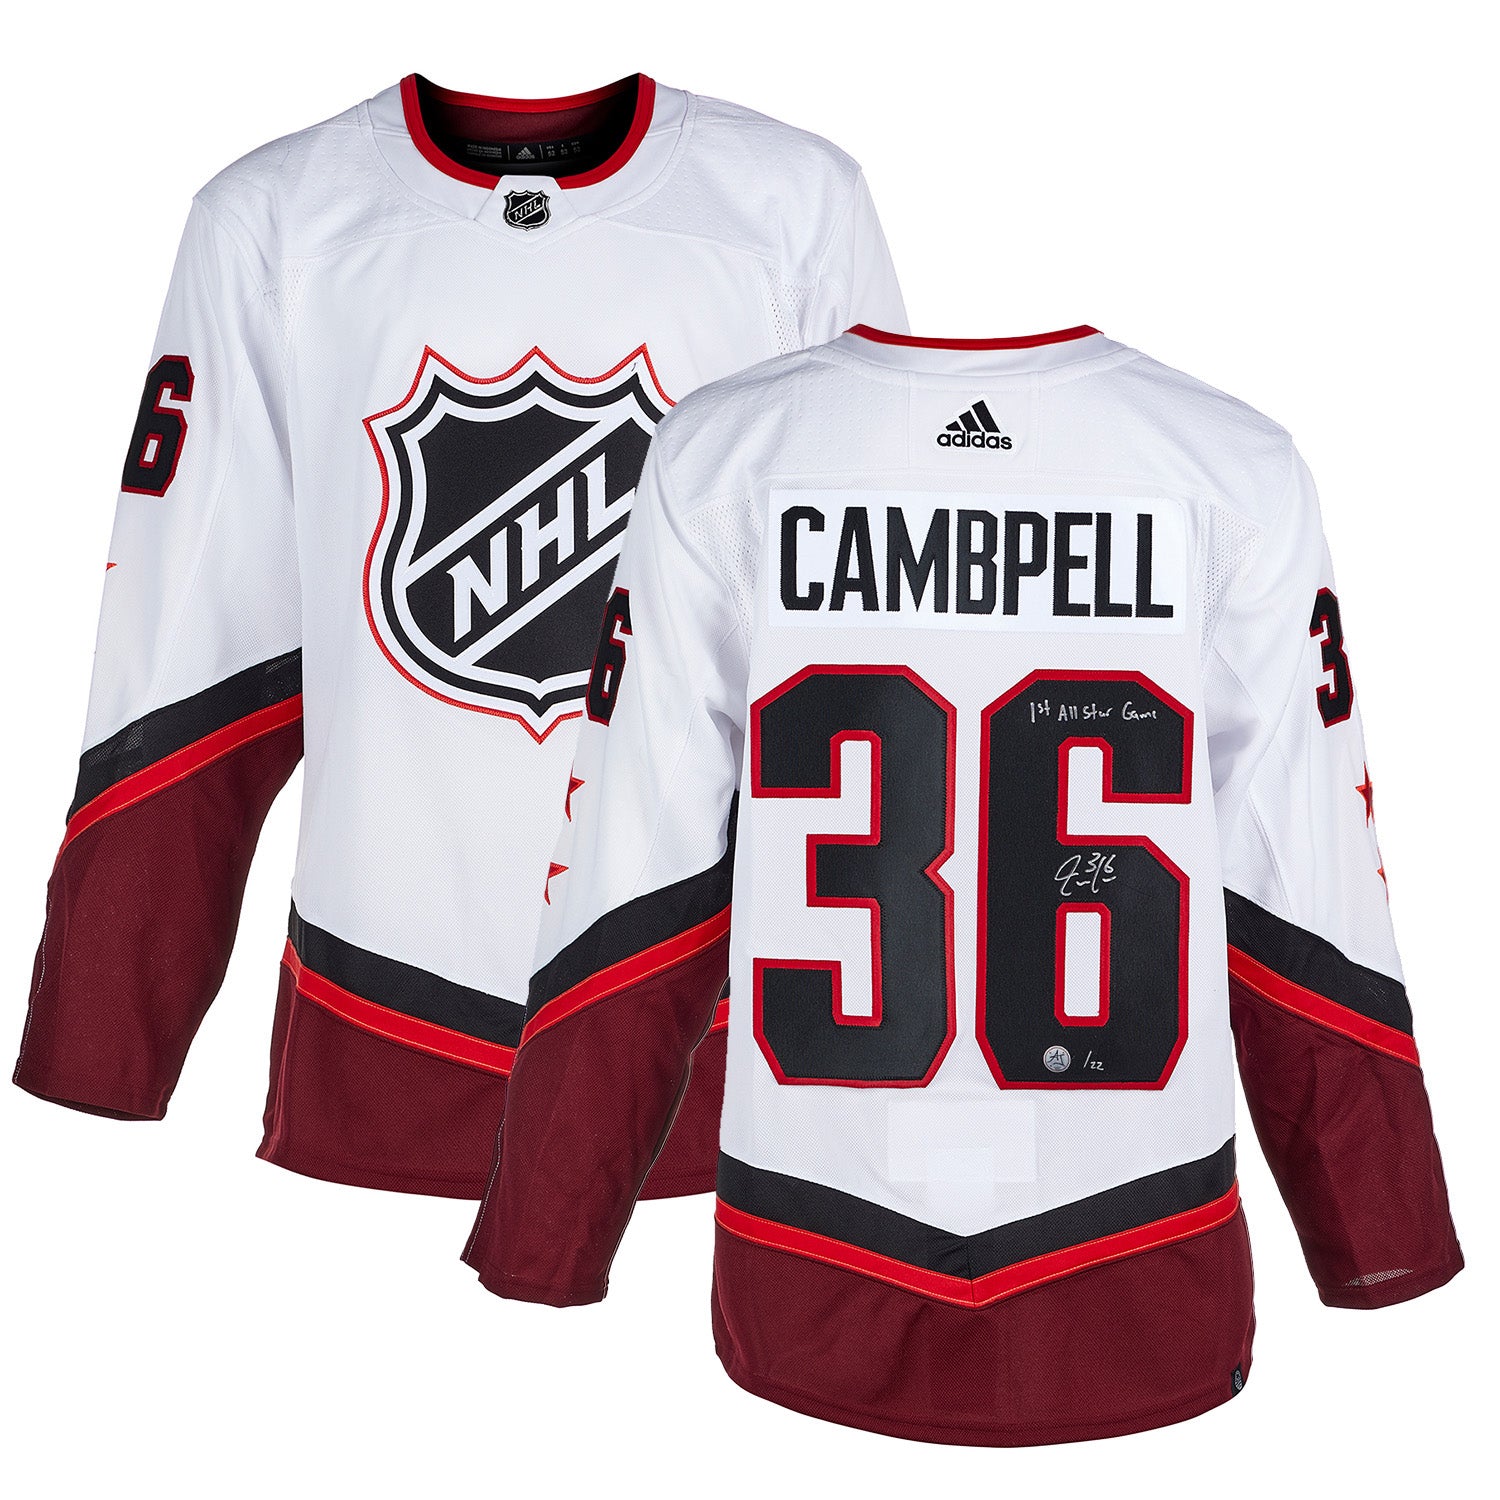 Jack Campbell White Toronto Maple Leafs Autographed adidas Authentic Jersey